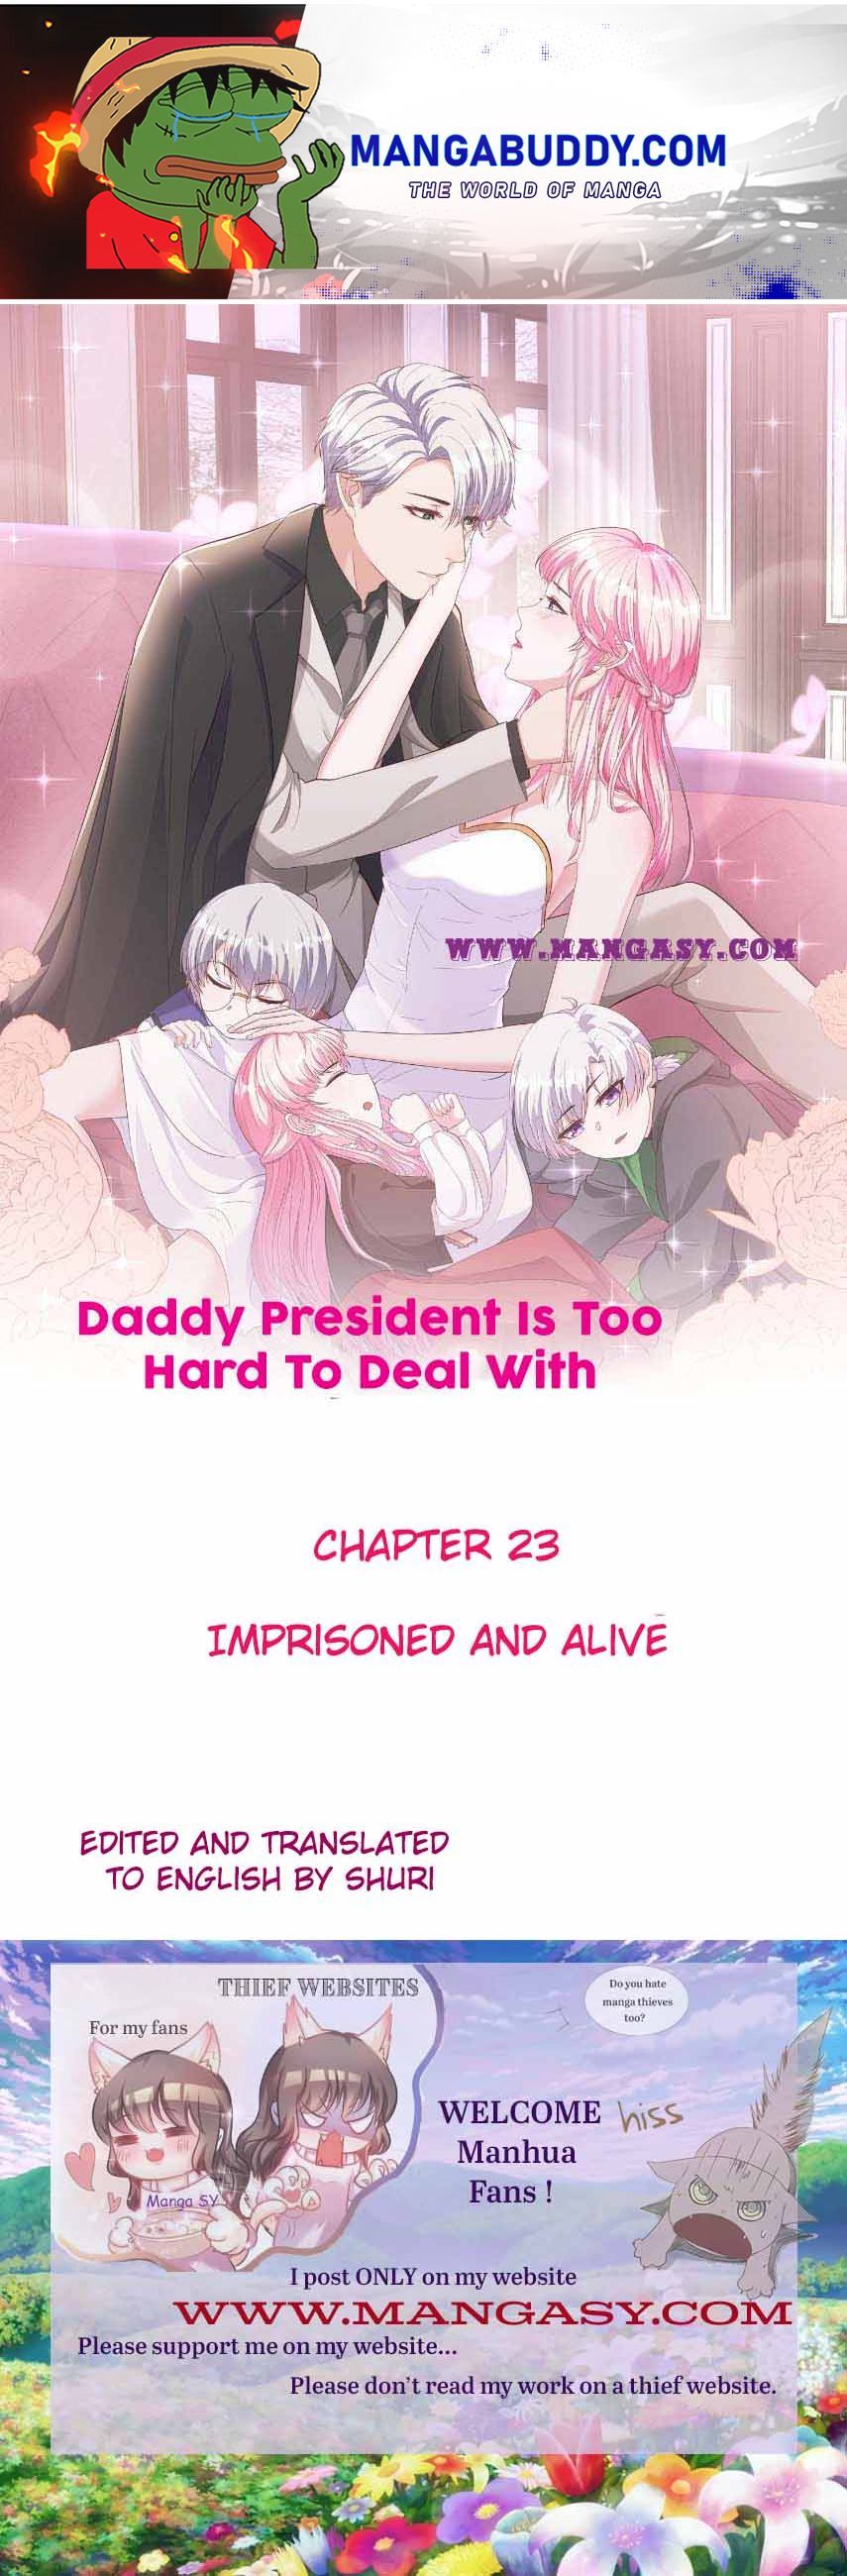 Daddy President Is Too Hard To Deal With chapter 23